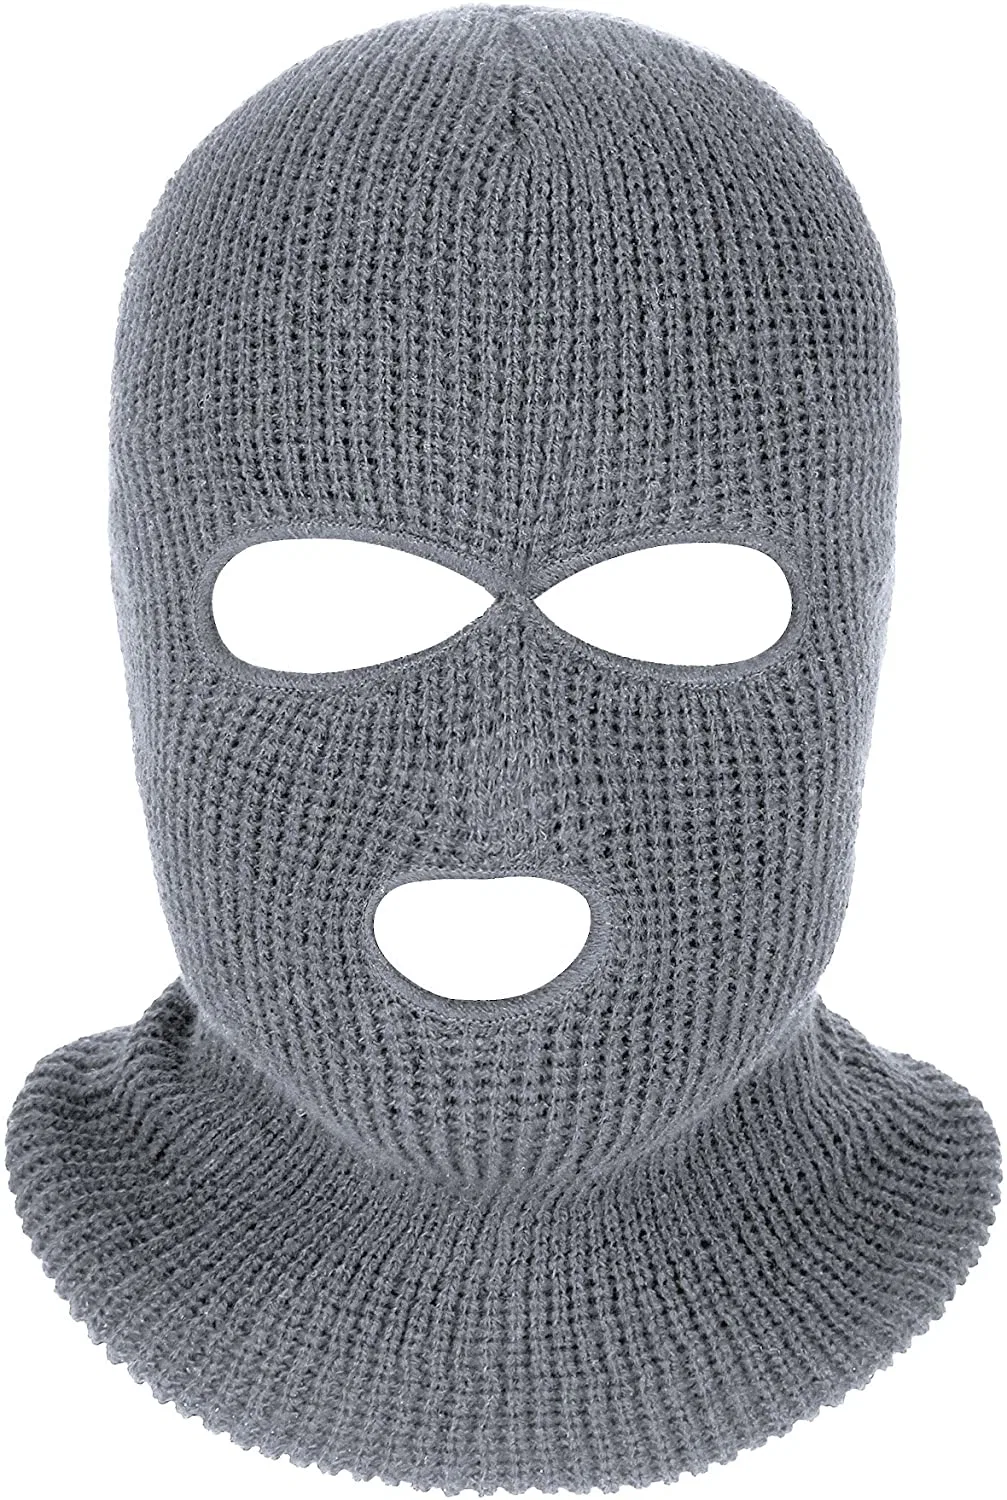 Grey 3 Holes Full Face Cover Knitted Balaclava Face Mask Winter Ski Mask for Winter Adult Supplies